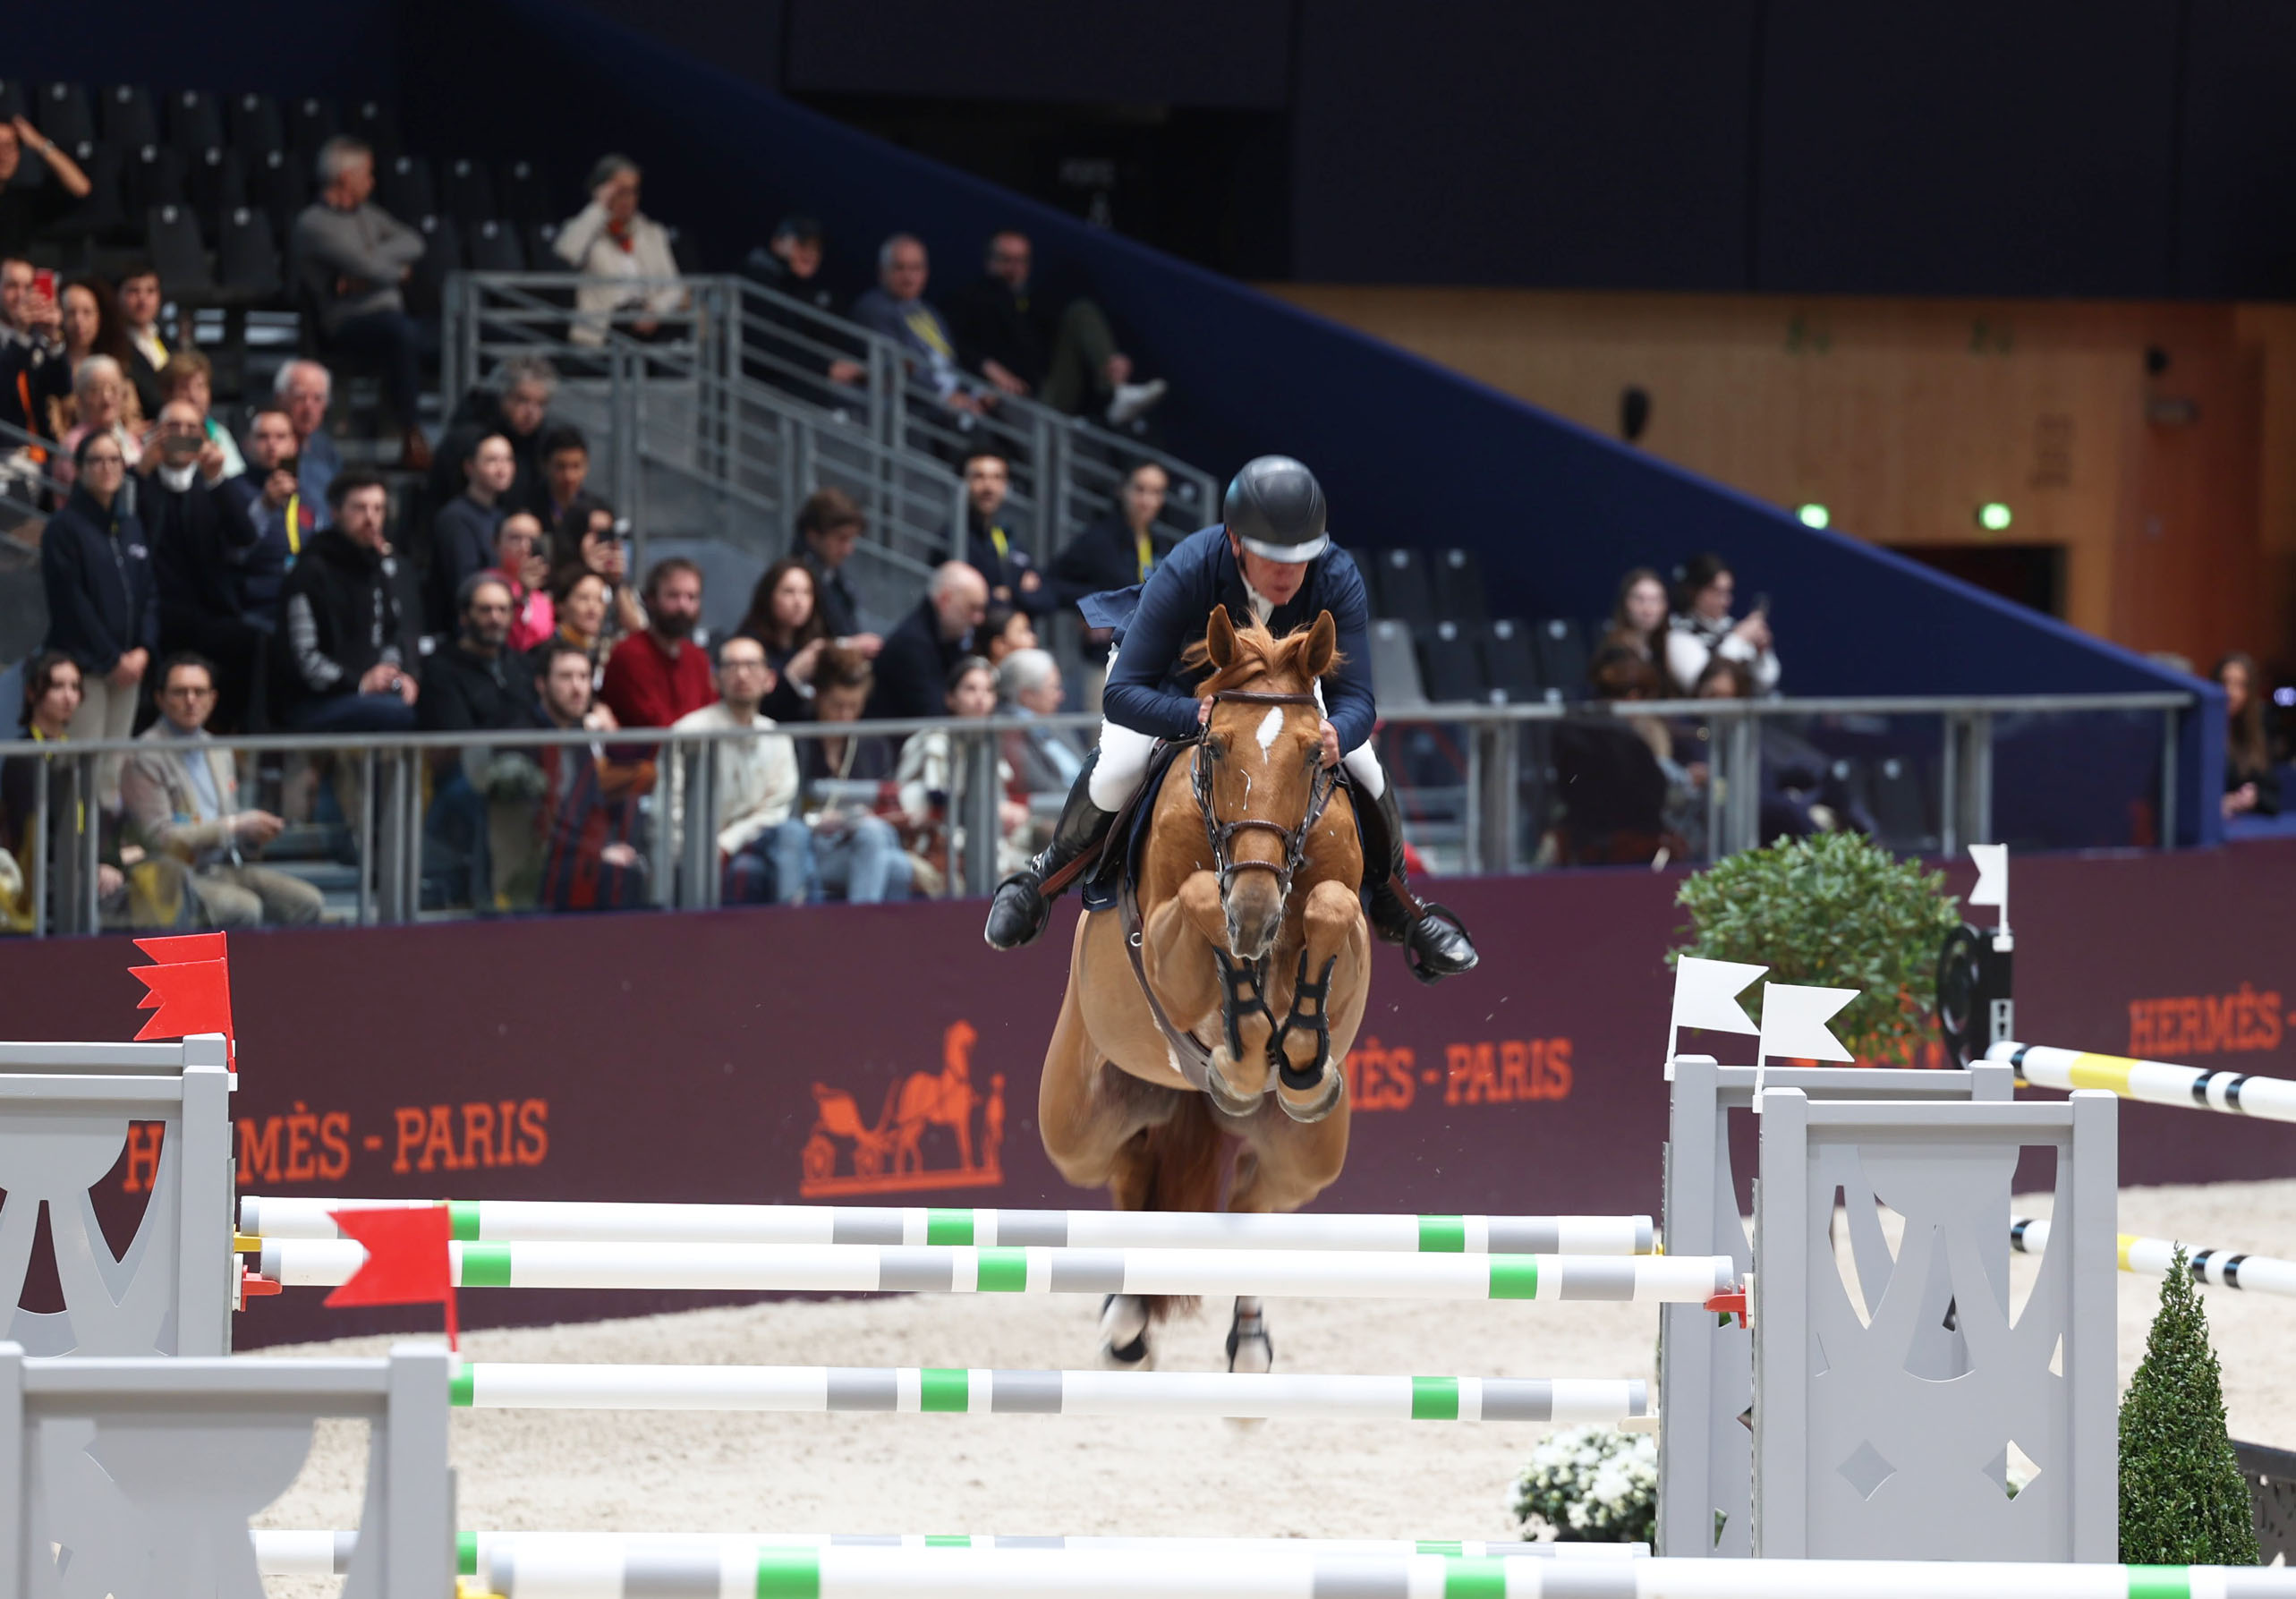 Roger-Yves Bost excites home crowd in Paris!